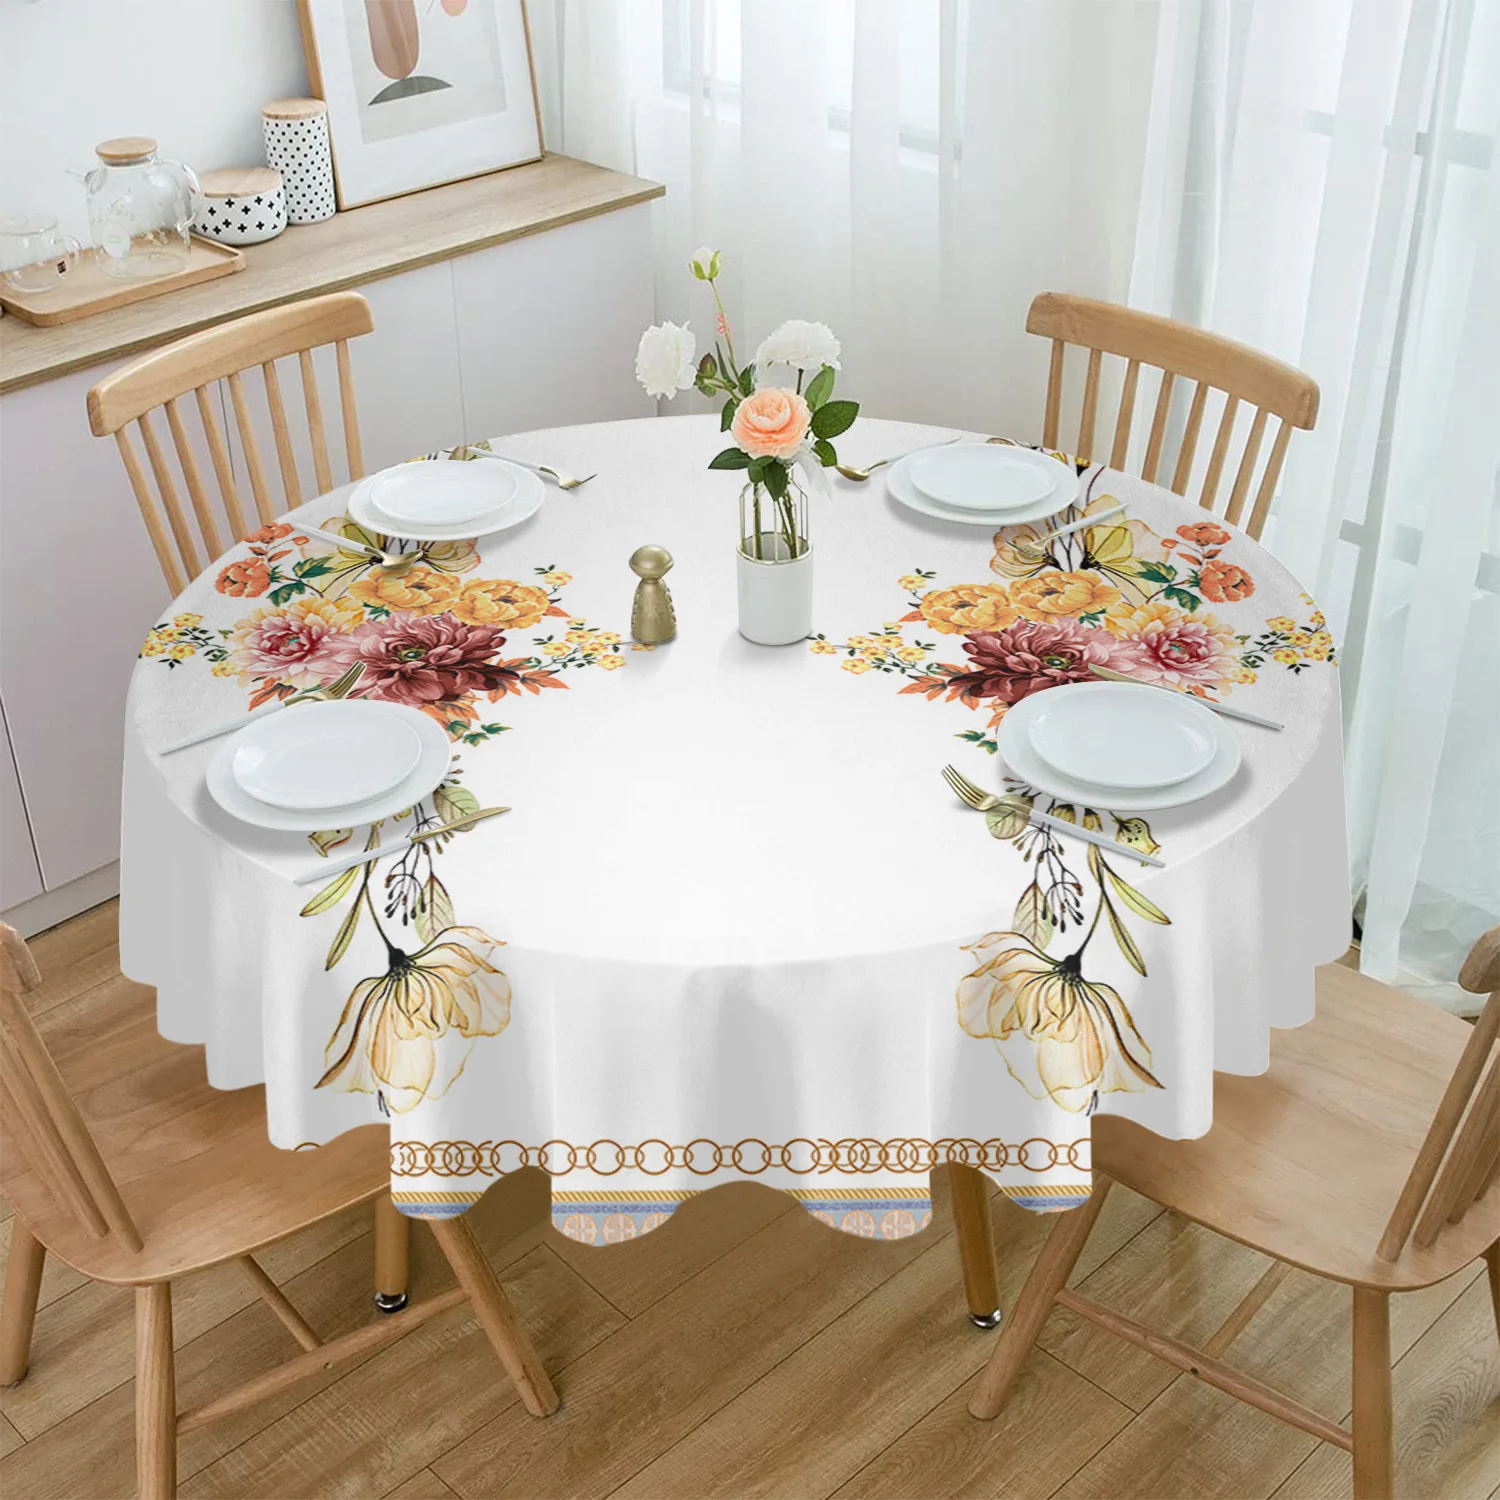 

Flowers Circles Hand Painted Leaves Round Tablecloth Waterproof Table Cover for Wedding Party Decoration Dining Table Cover